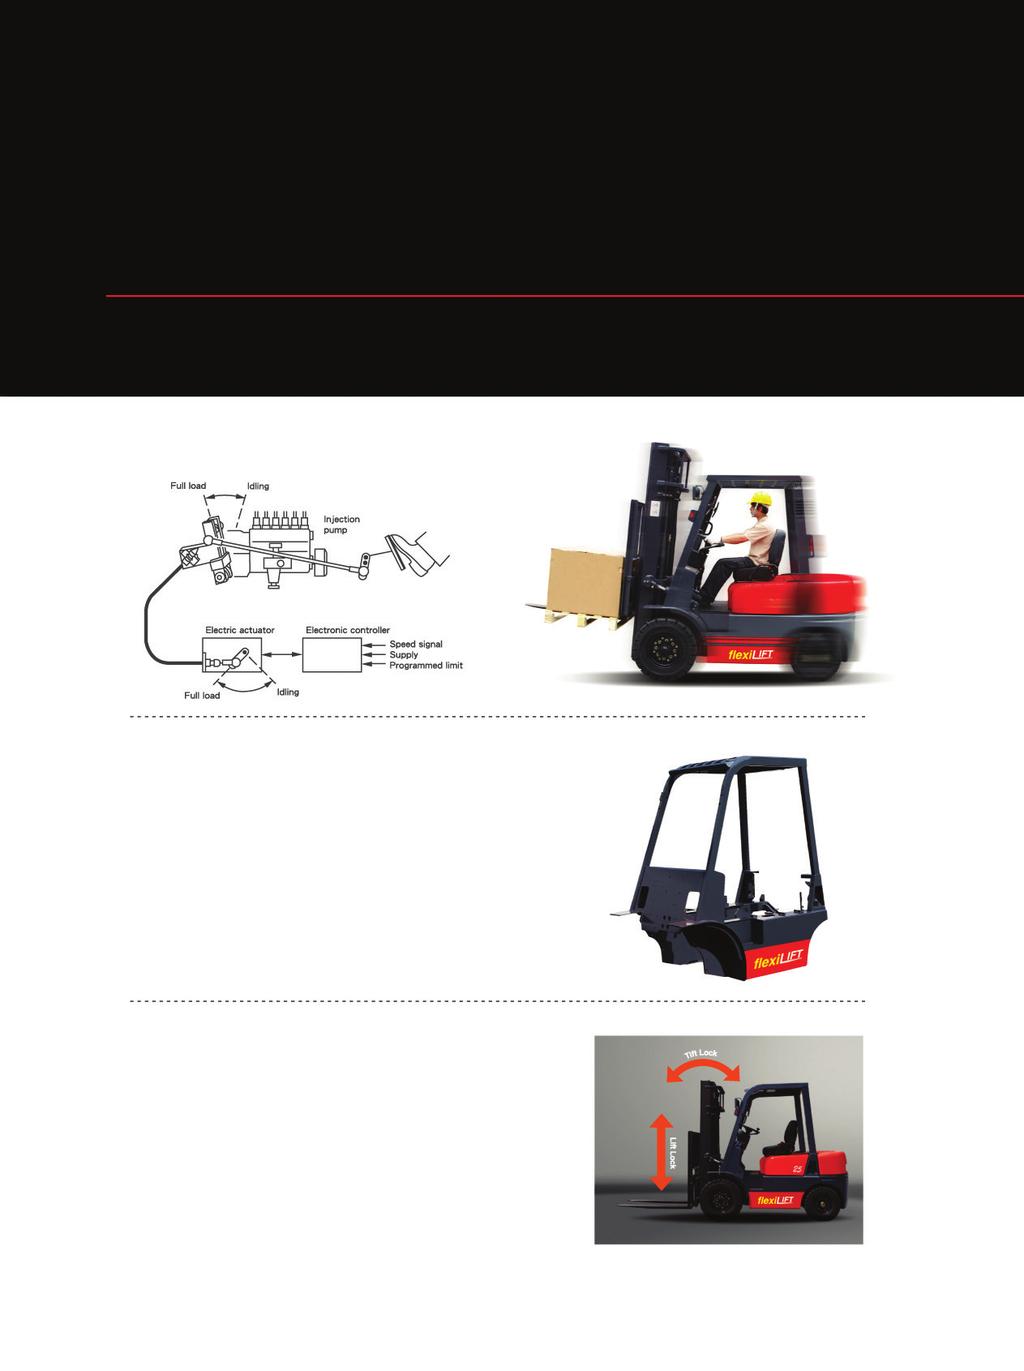 Safe. Stable. Efficient Flexilift forklift provides features that deliver what s most important to you.